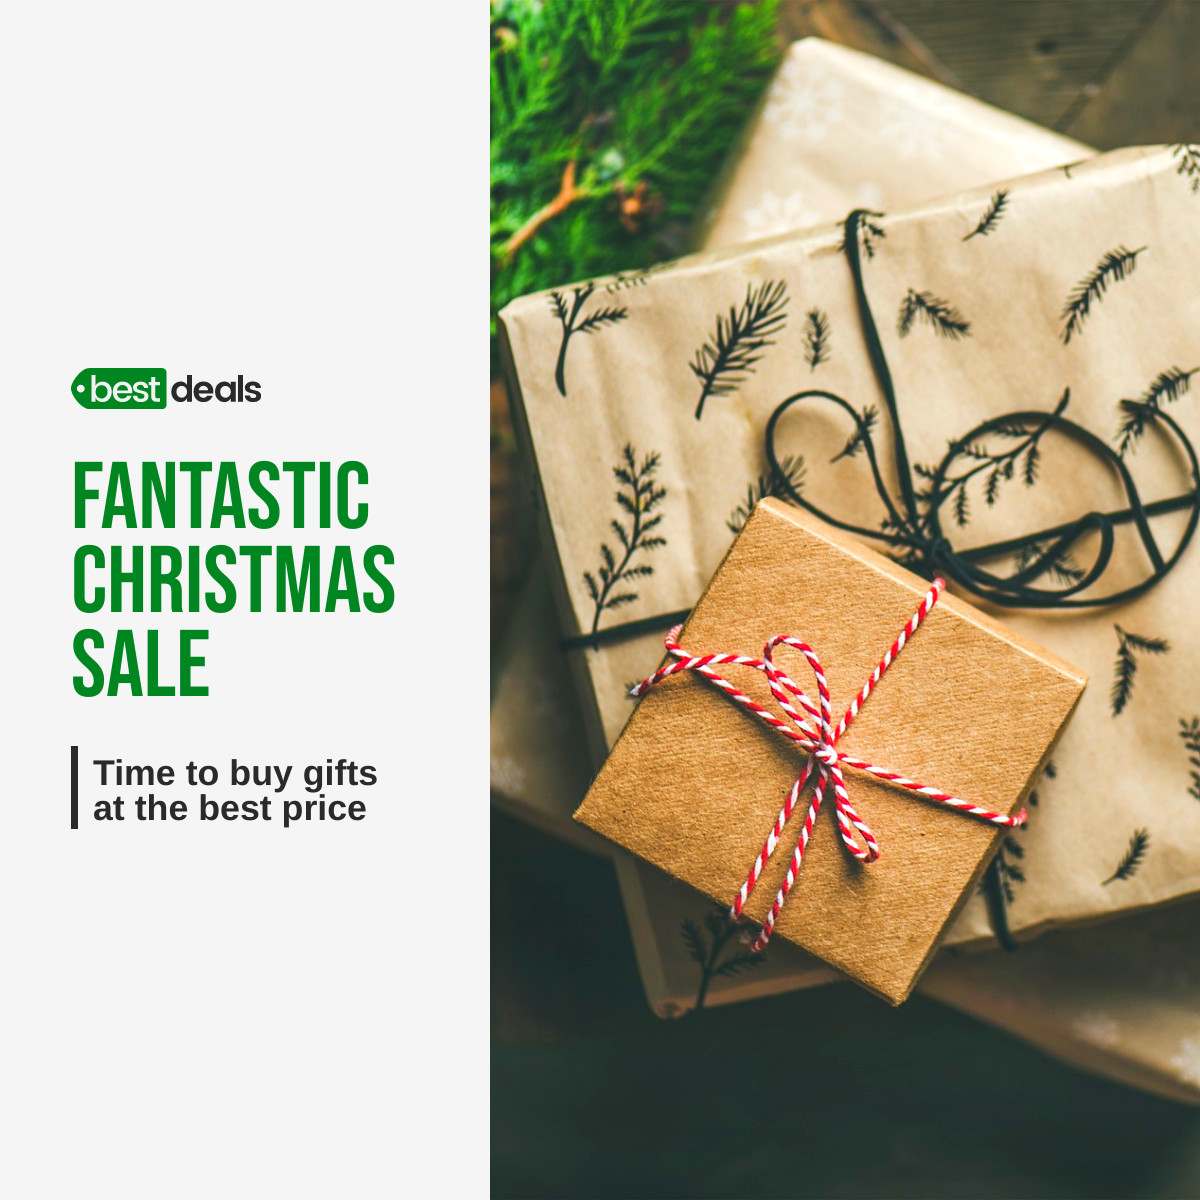 Fantastic Christmas Sale to Buy Gifts